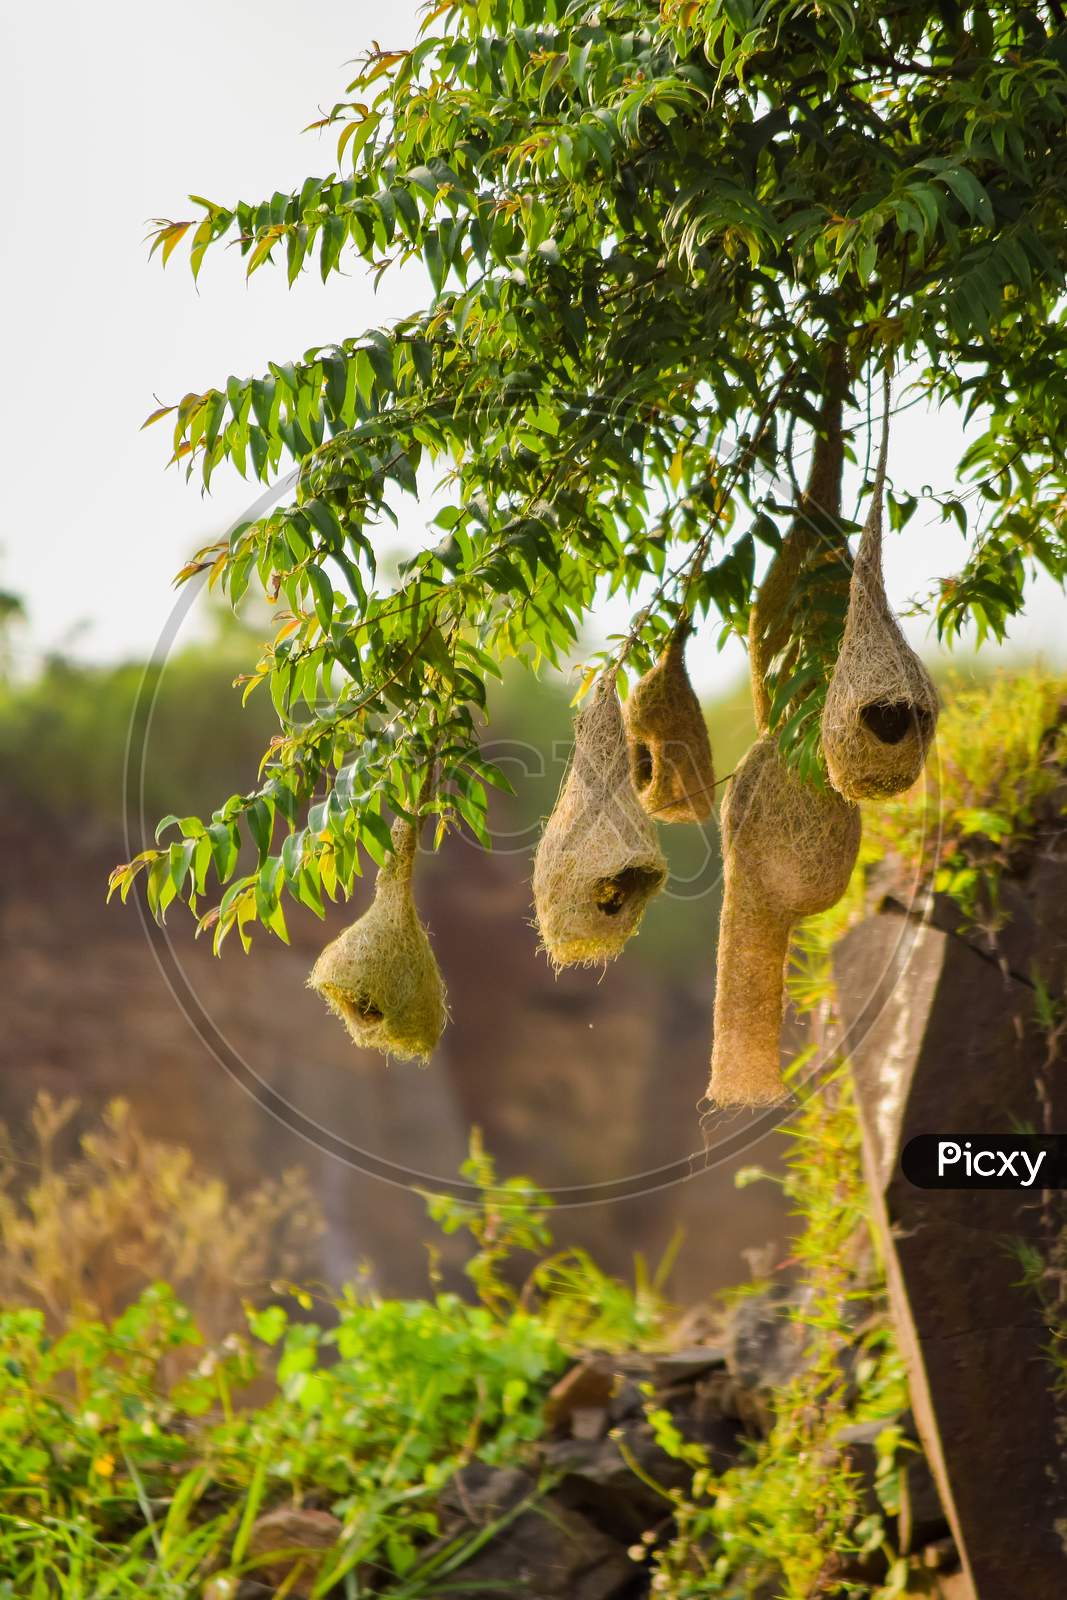 Nests Of Weaver Bird Hanging To The Tree Branches. Used Selective Focus.